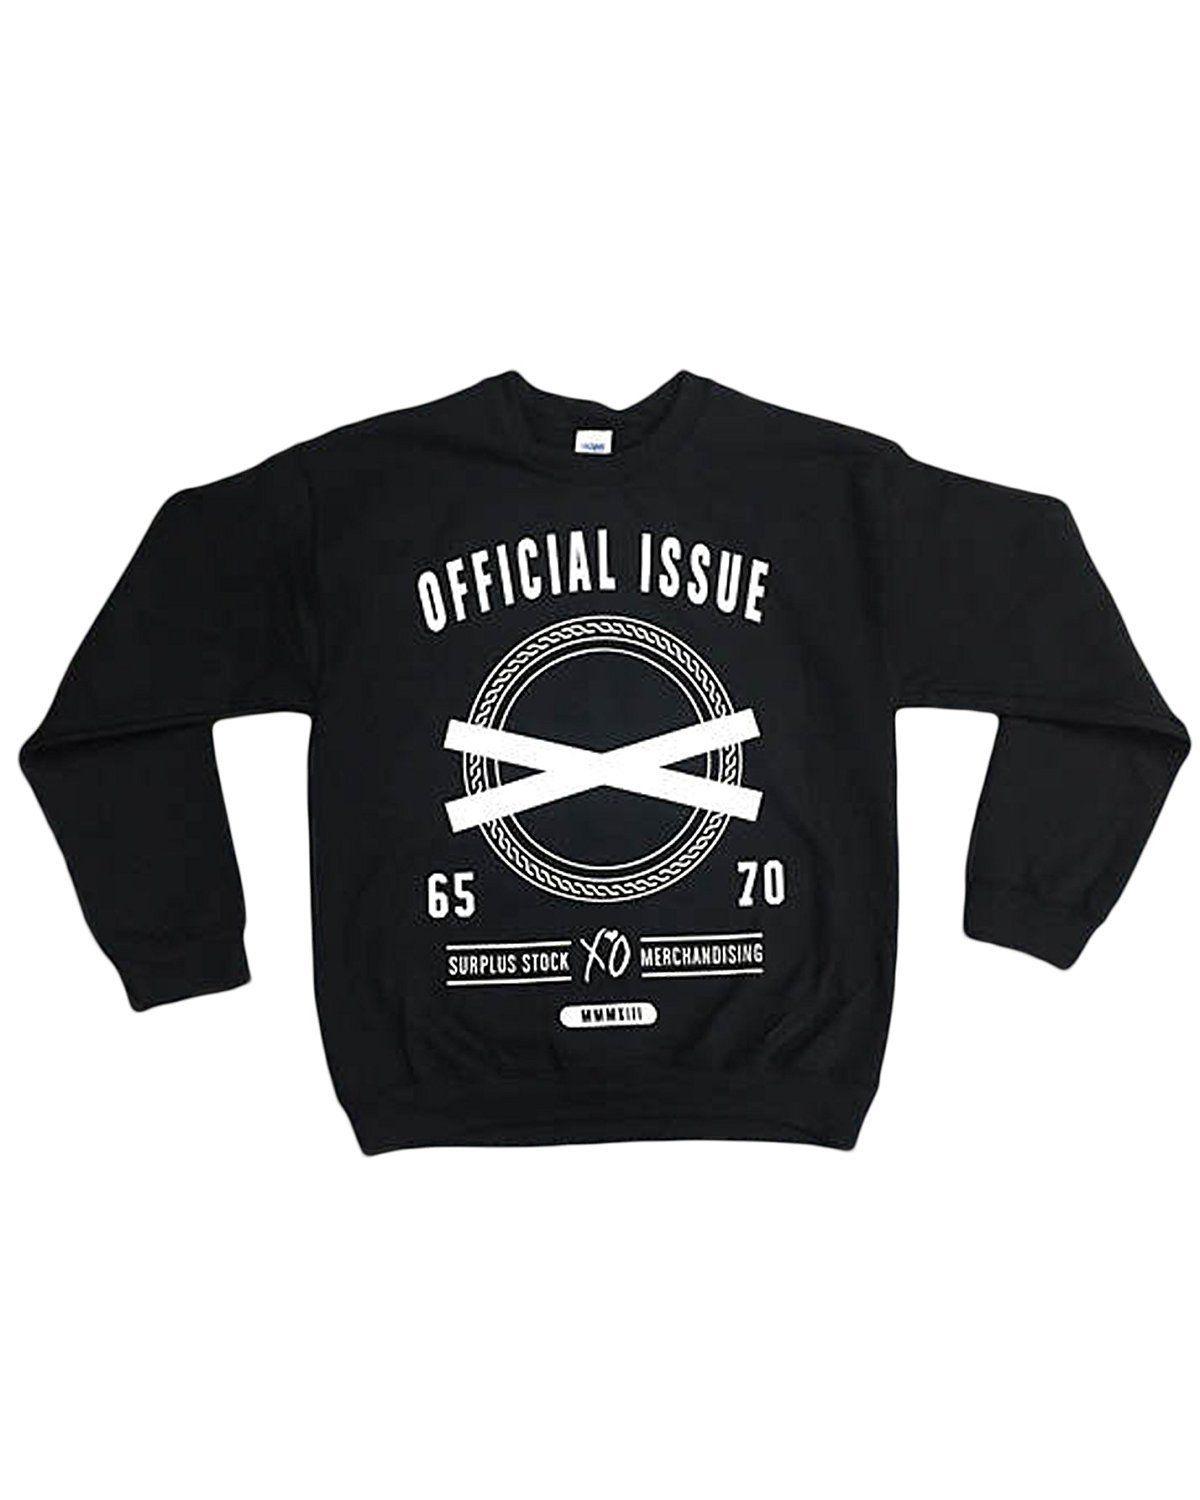 Official Issue Xo Logo - Official Issue XO Crew Neck 2017 (White-Print) - Custom City